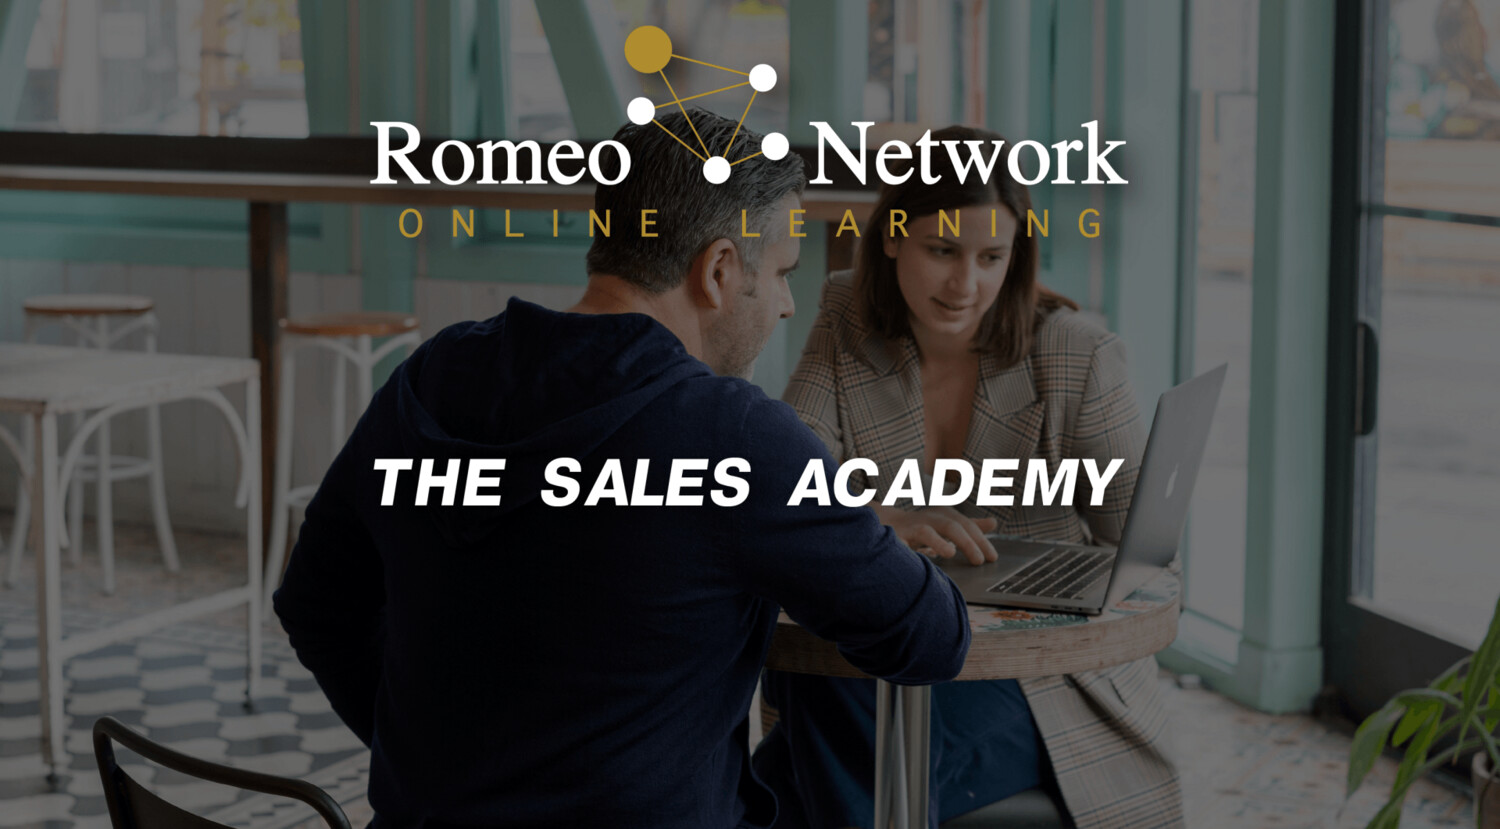 The Sales Academy (5-Part Series on 10/07, 10/14, 10/21, 10/28, & 11/04) Fall Online Event